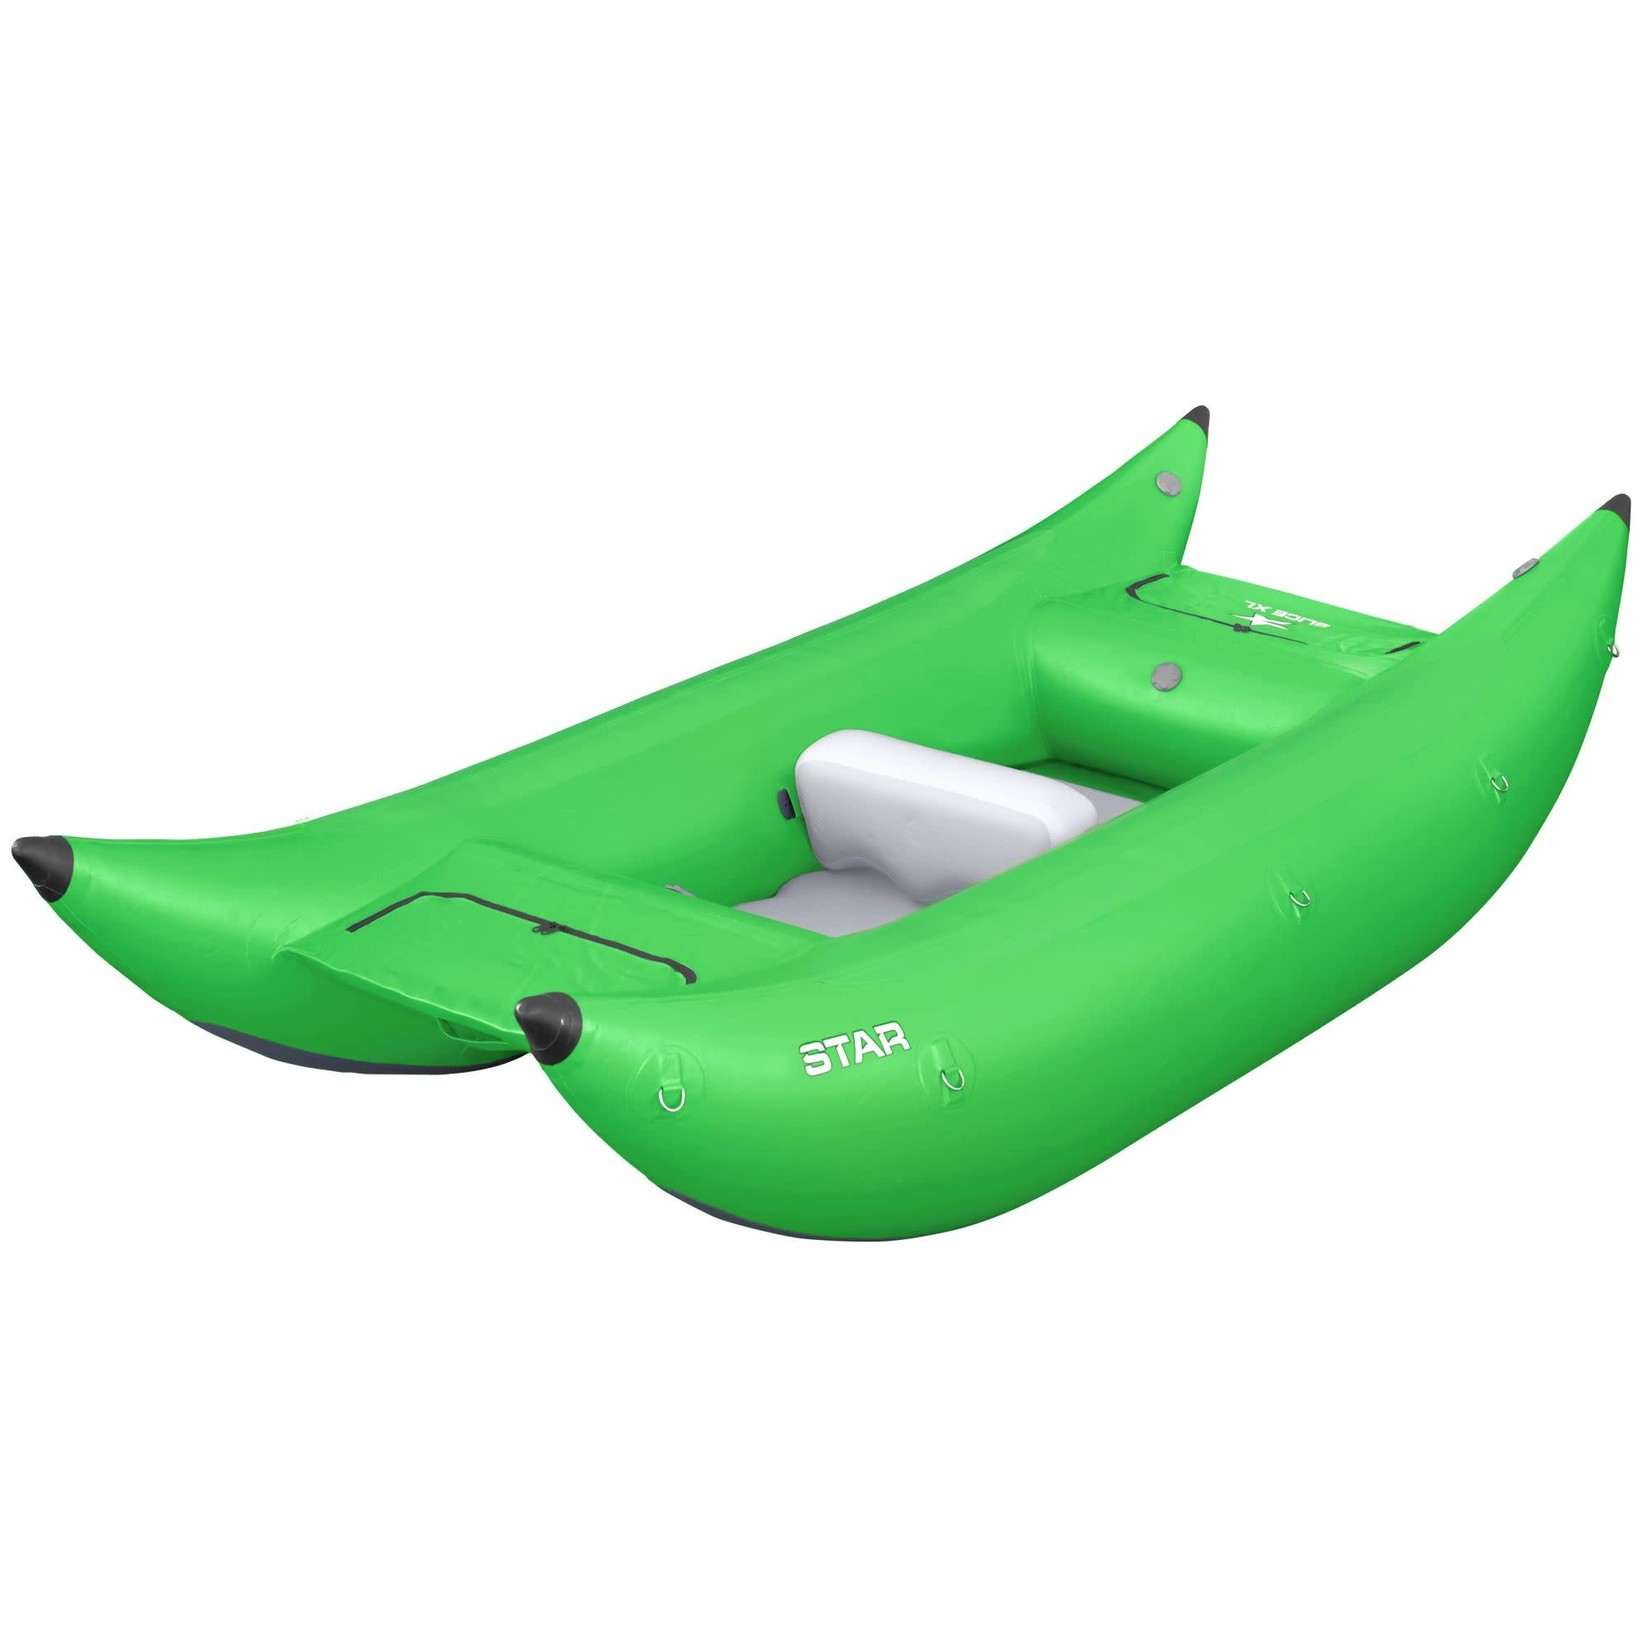 STAR Inflatables STAR Slice XL Paddle Catarafts